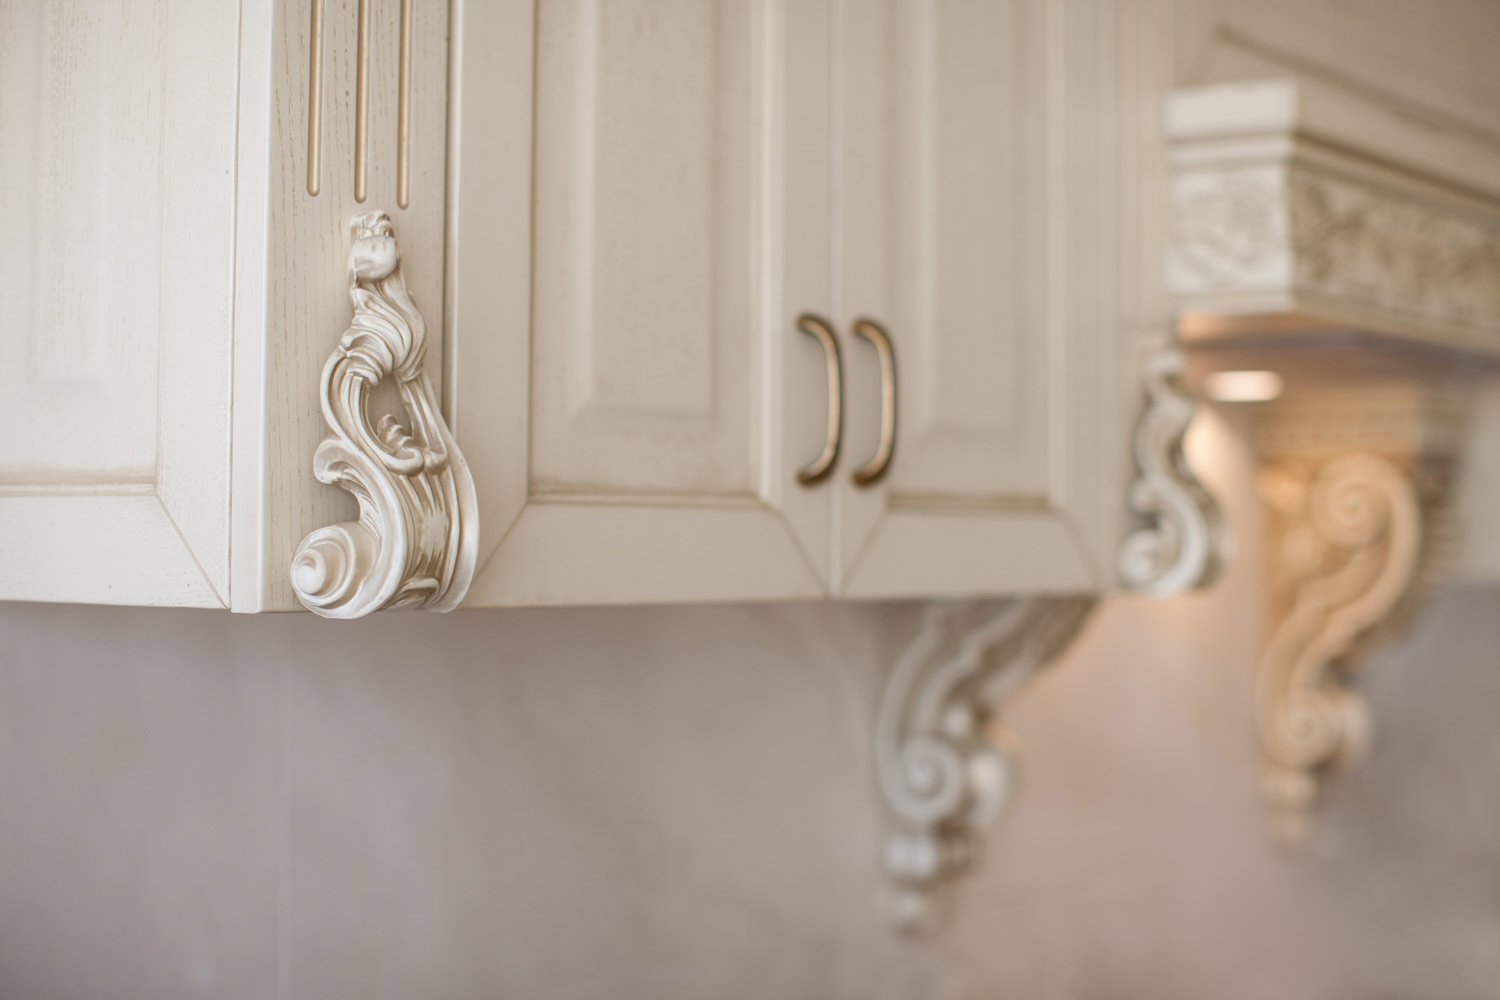 6-French-kitchen-carving-detail-on-cupboards-in-antique-white-painted-finish-